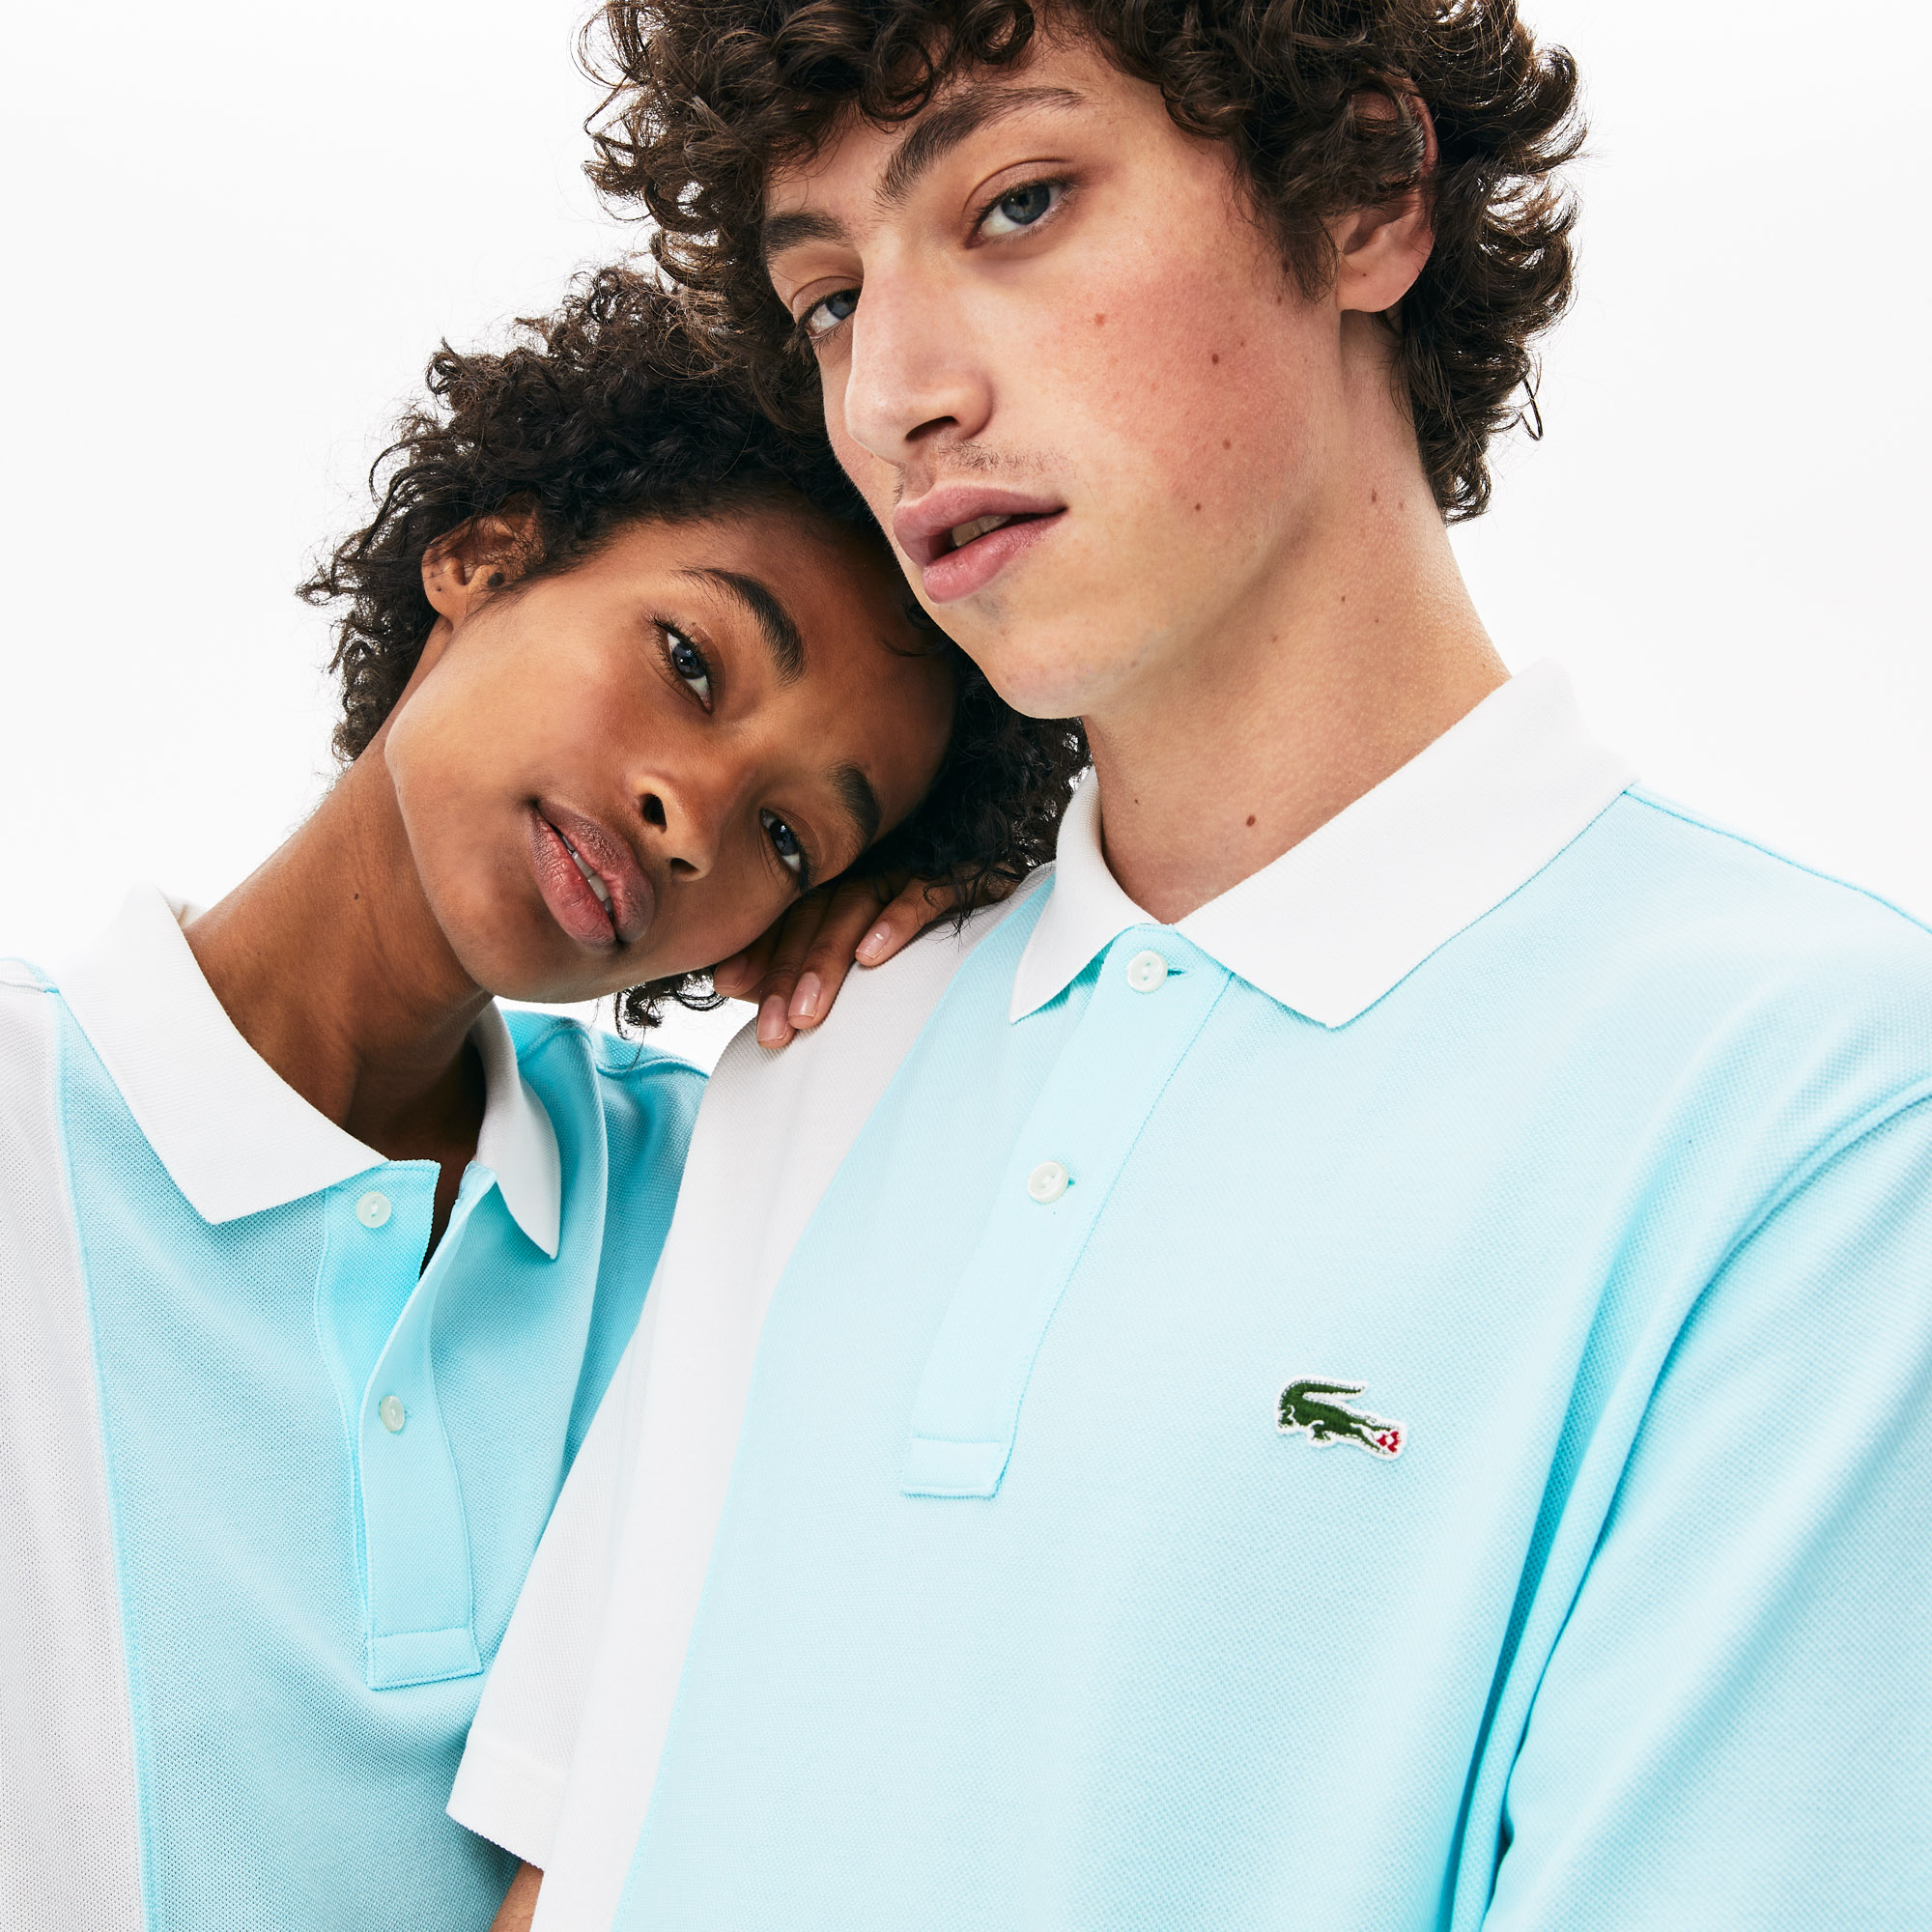 Check Out the Full LACOSTE x GOLF le FLEUR* Collection by Tyler, The ...